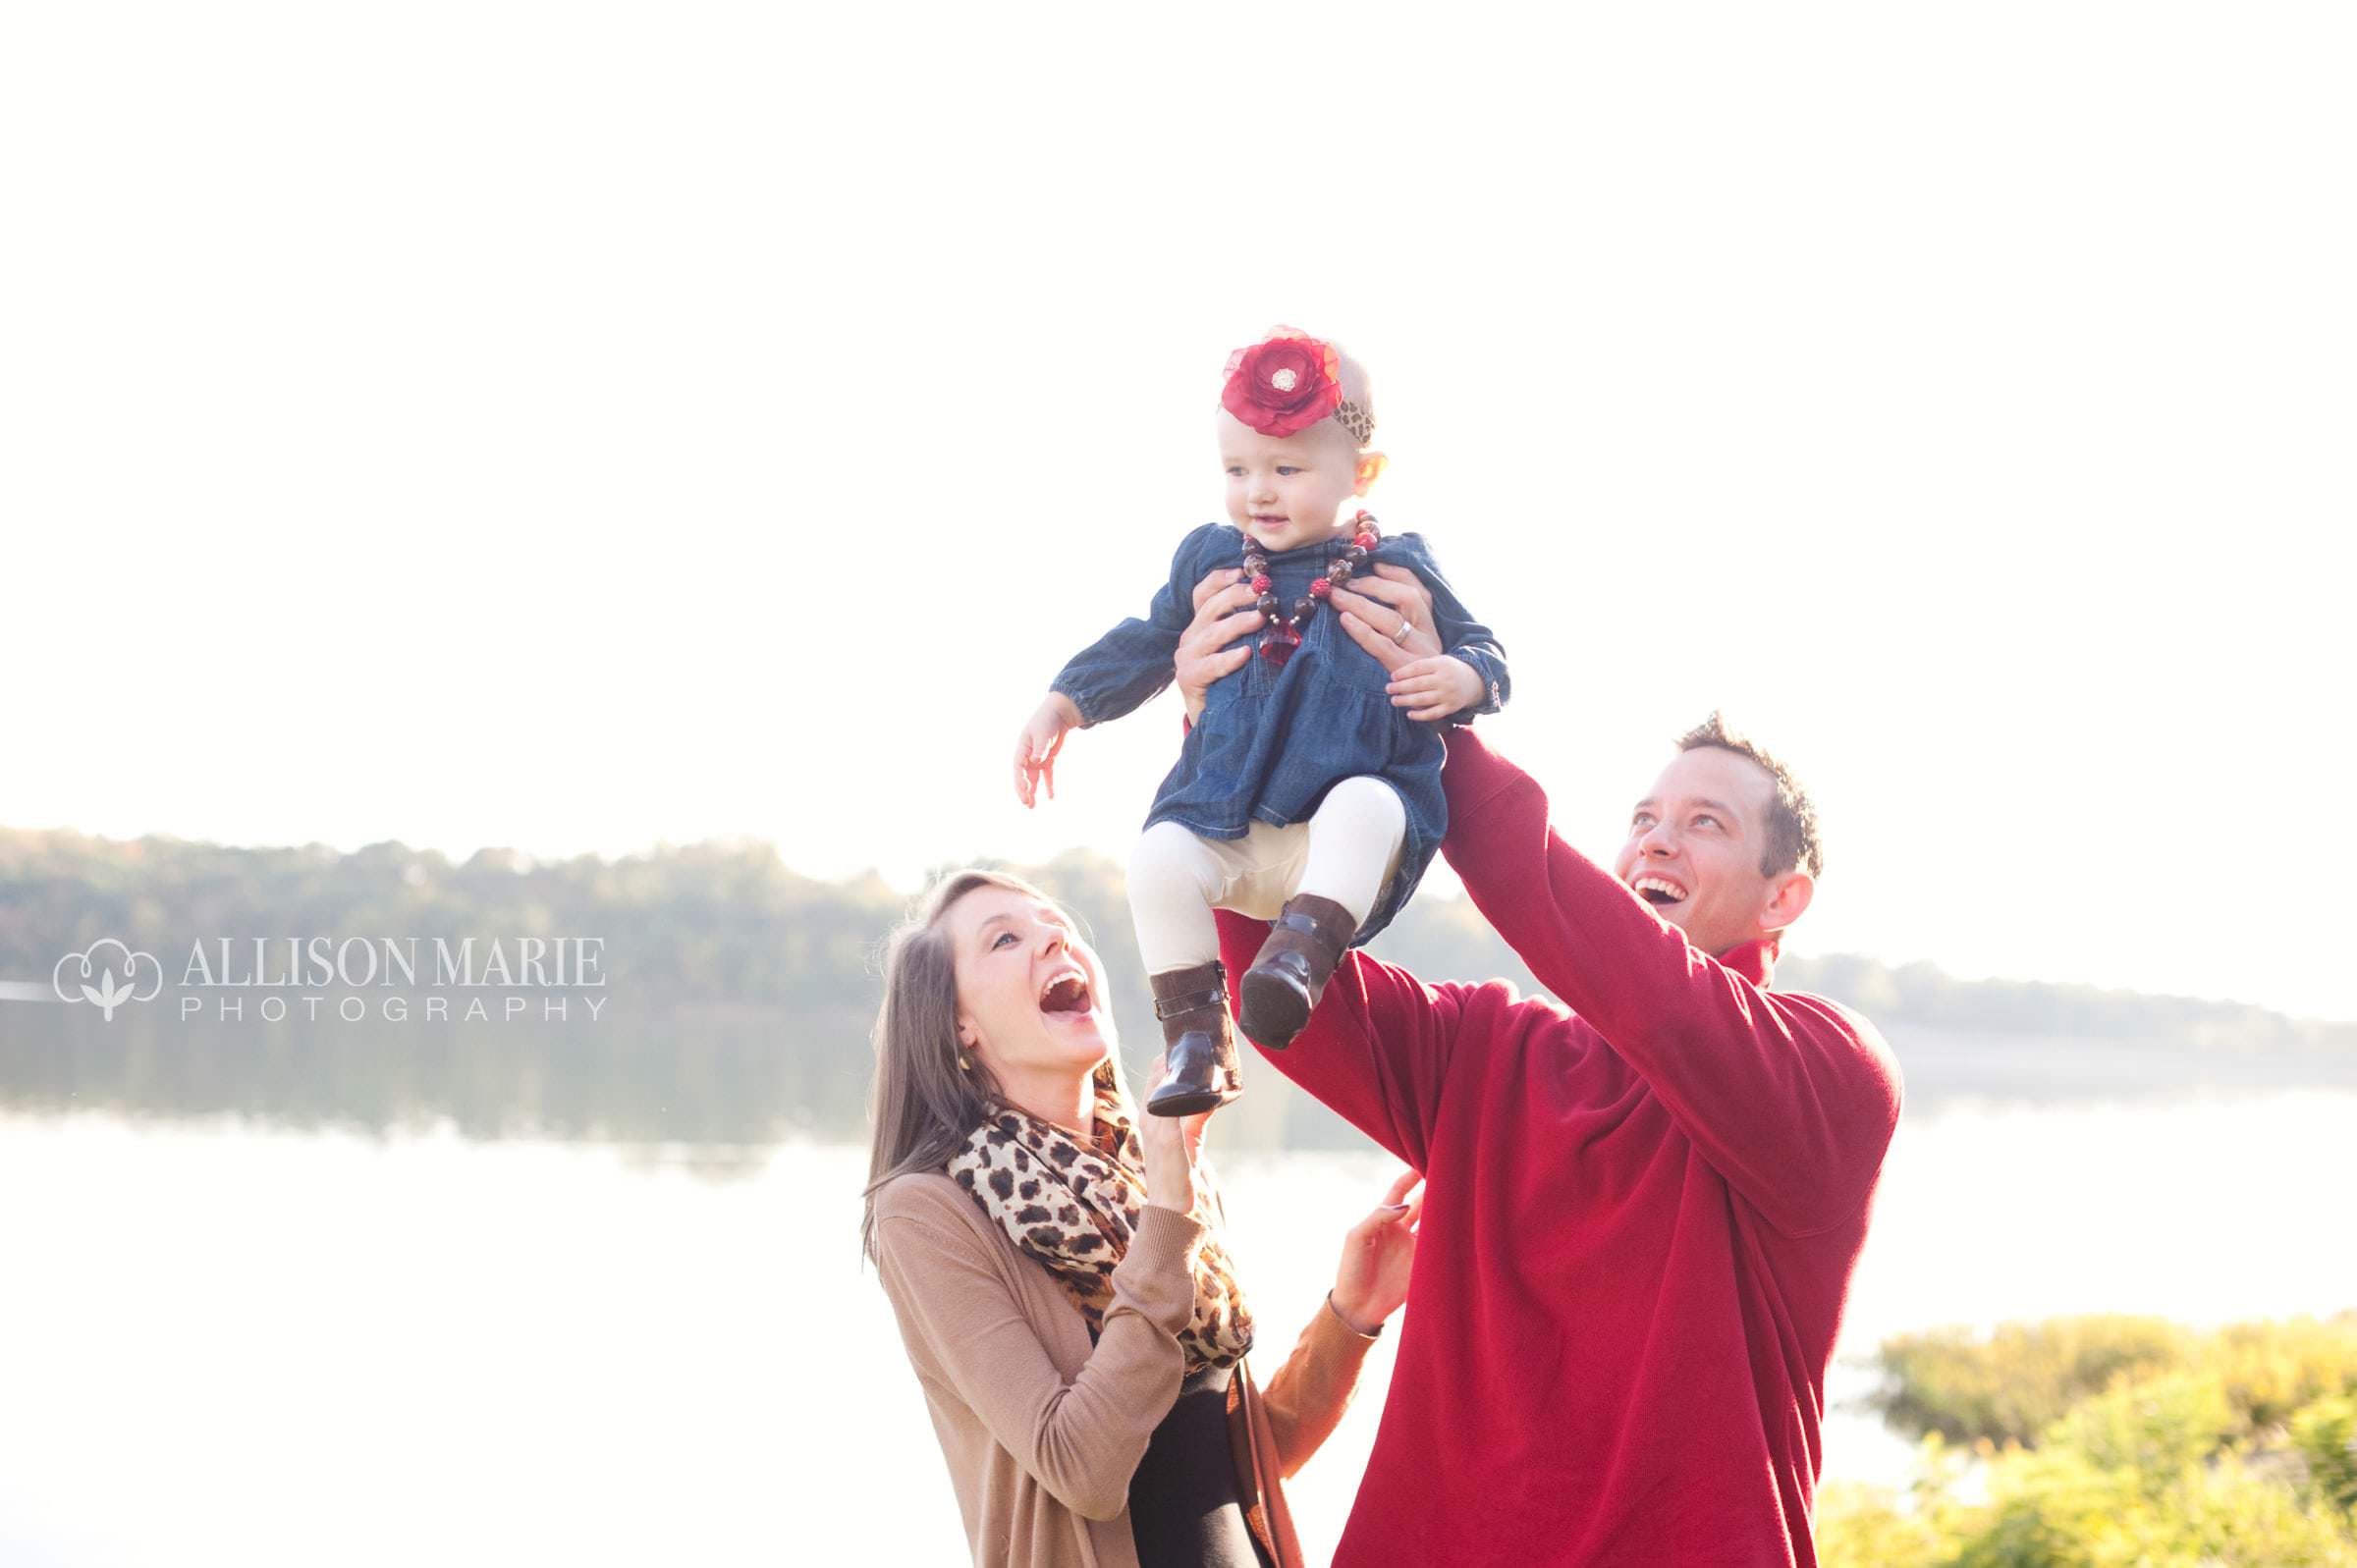 Favorite Family Images 2014, Allison Marie Photography13